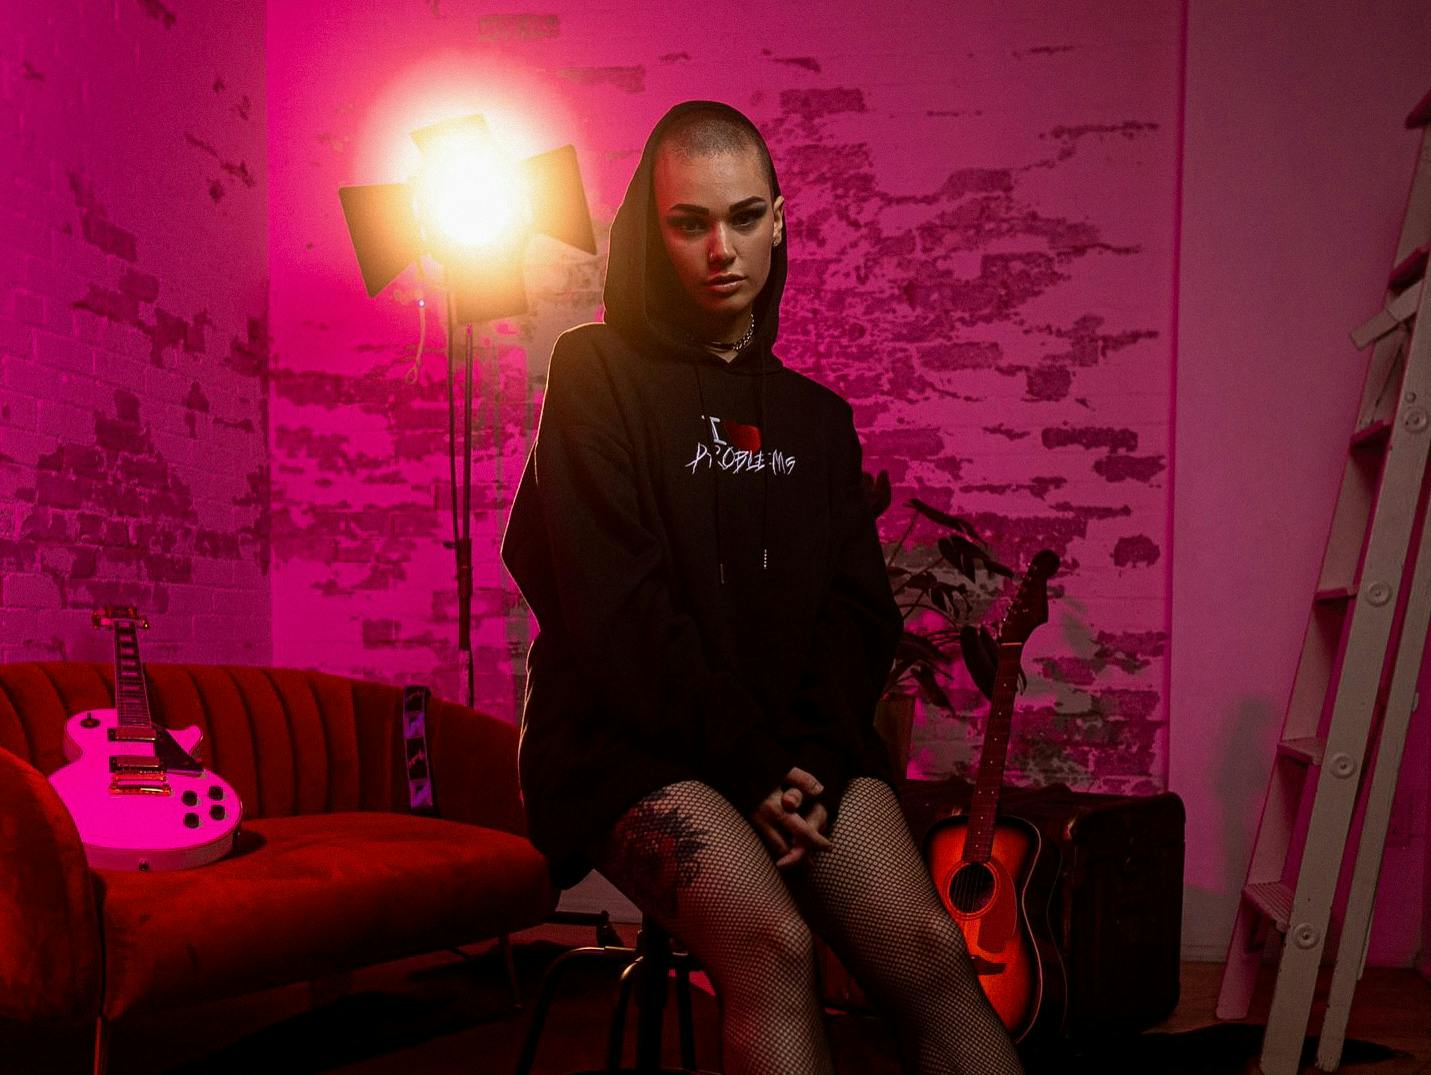 Female singer/songwriter Mela Bee sitting in a hoodie in a photography studio with purple lights.